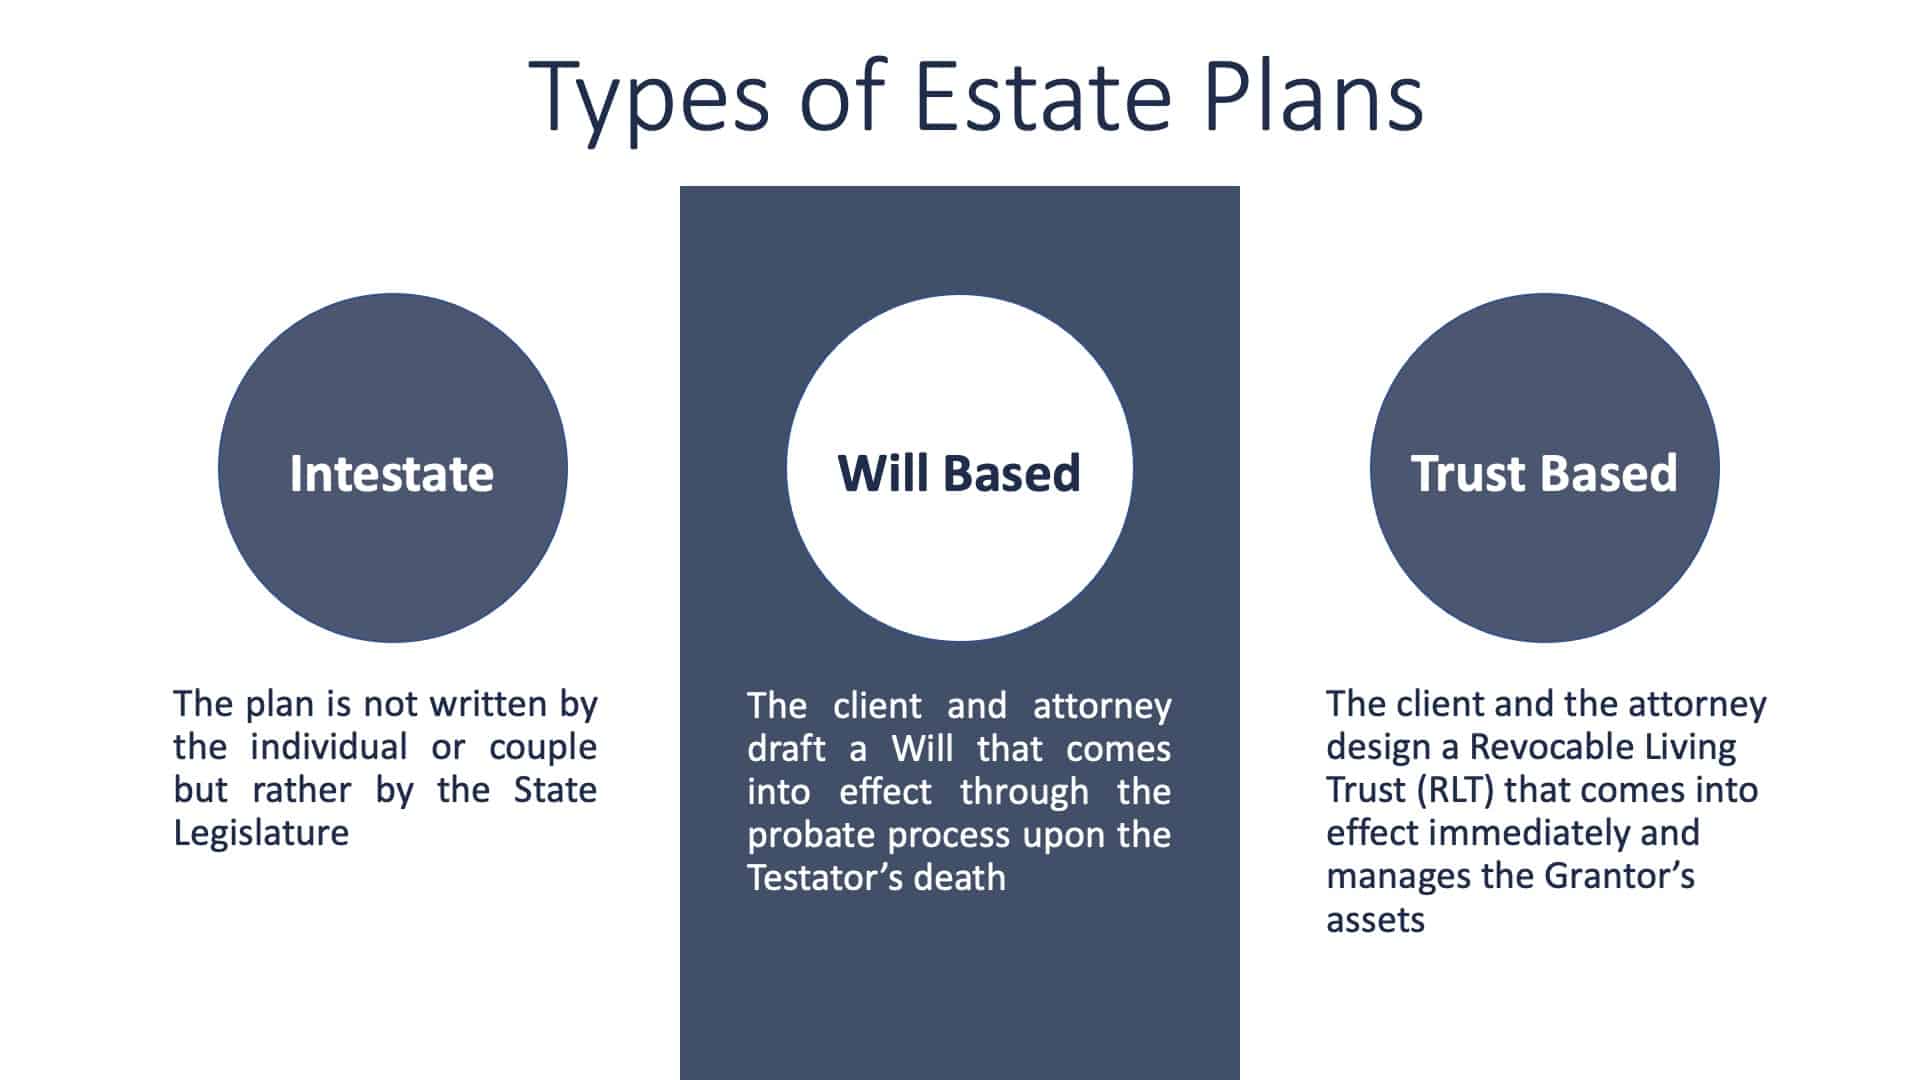 Is a Will Enough? - Types of Estate Plans